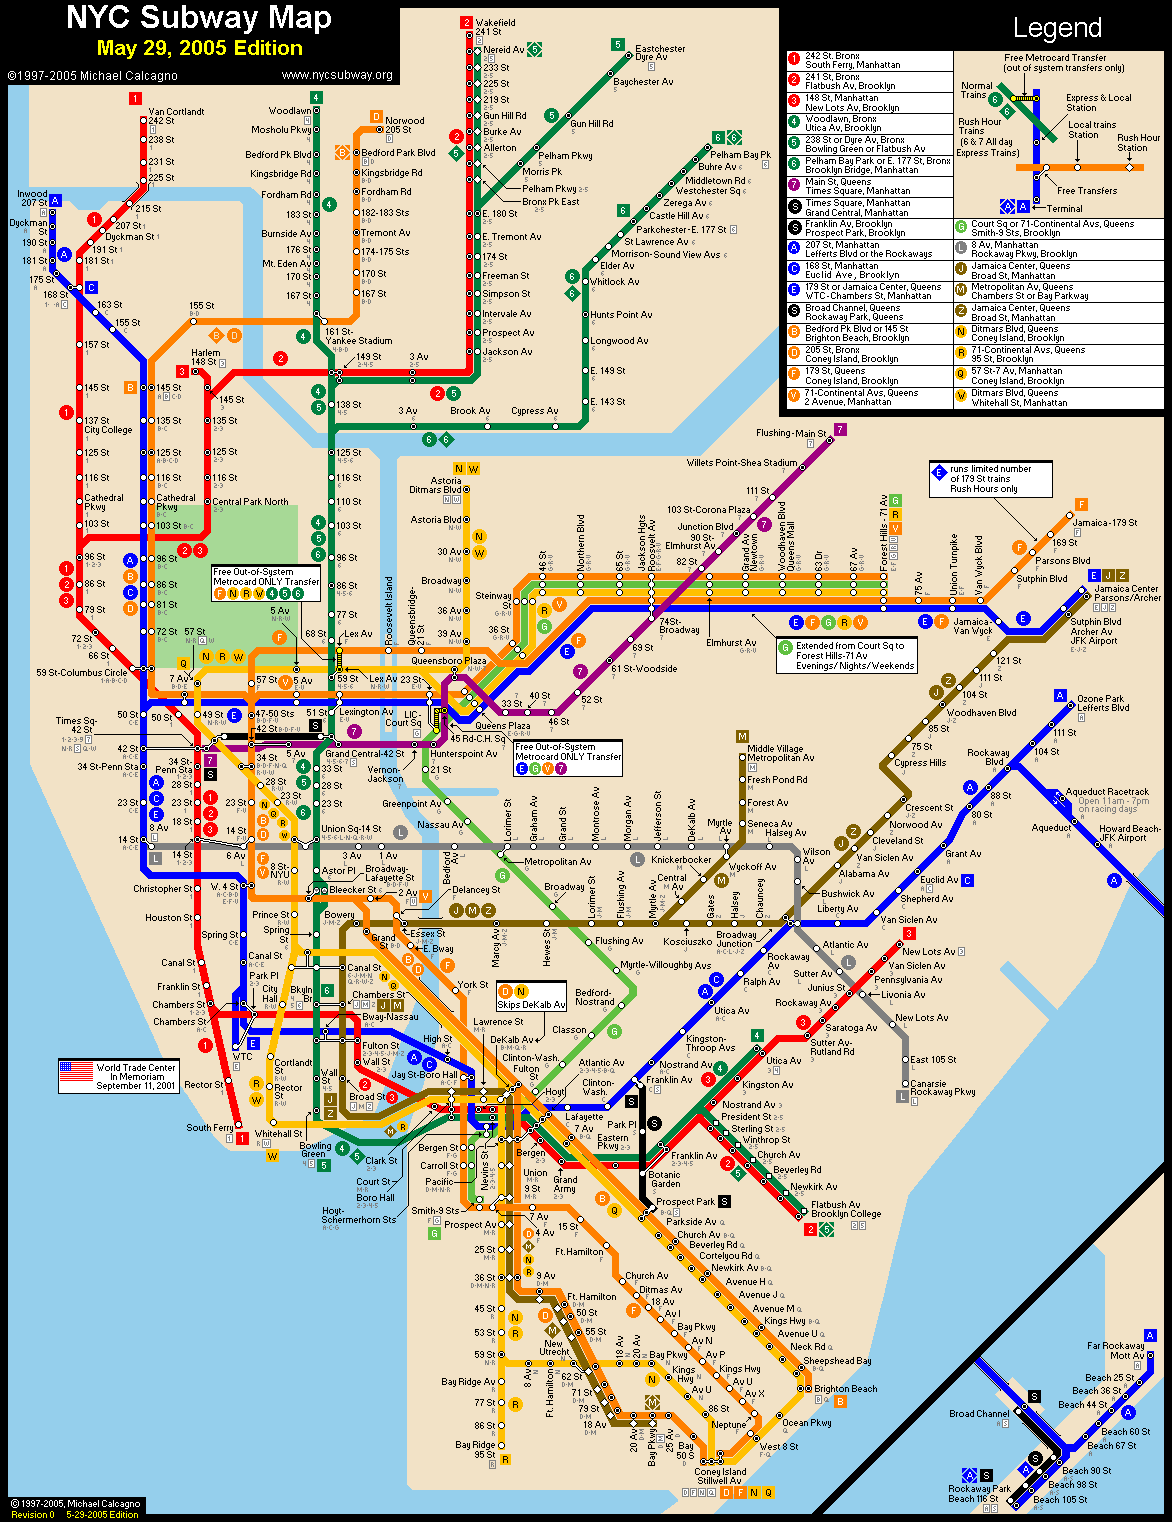 Subway map of New York City with the names of subway lines.